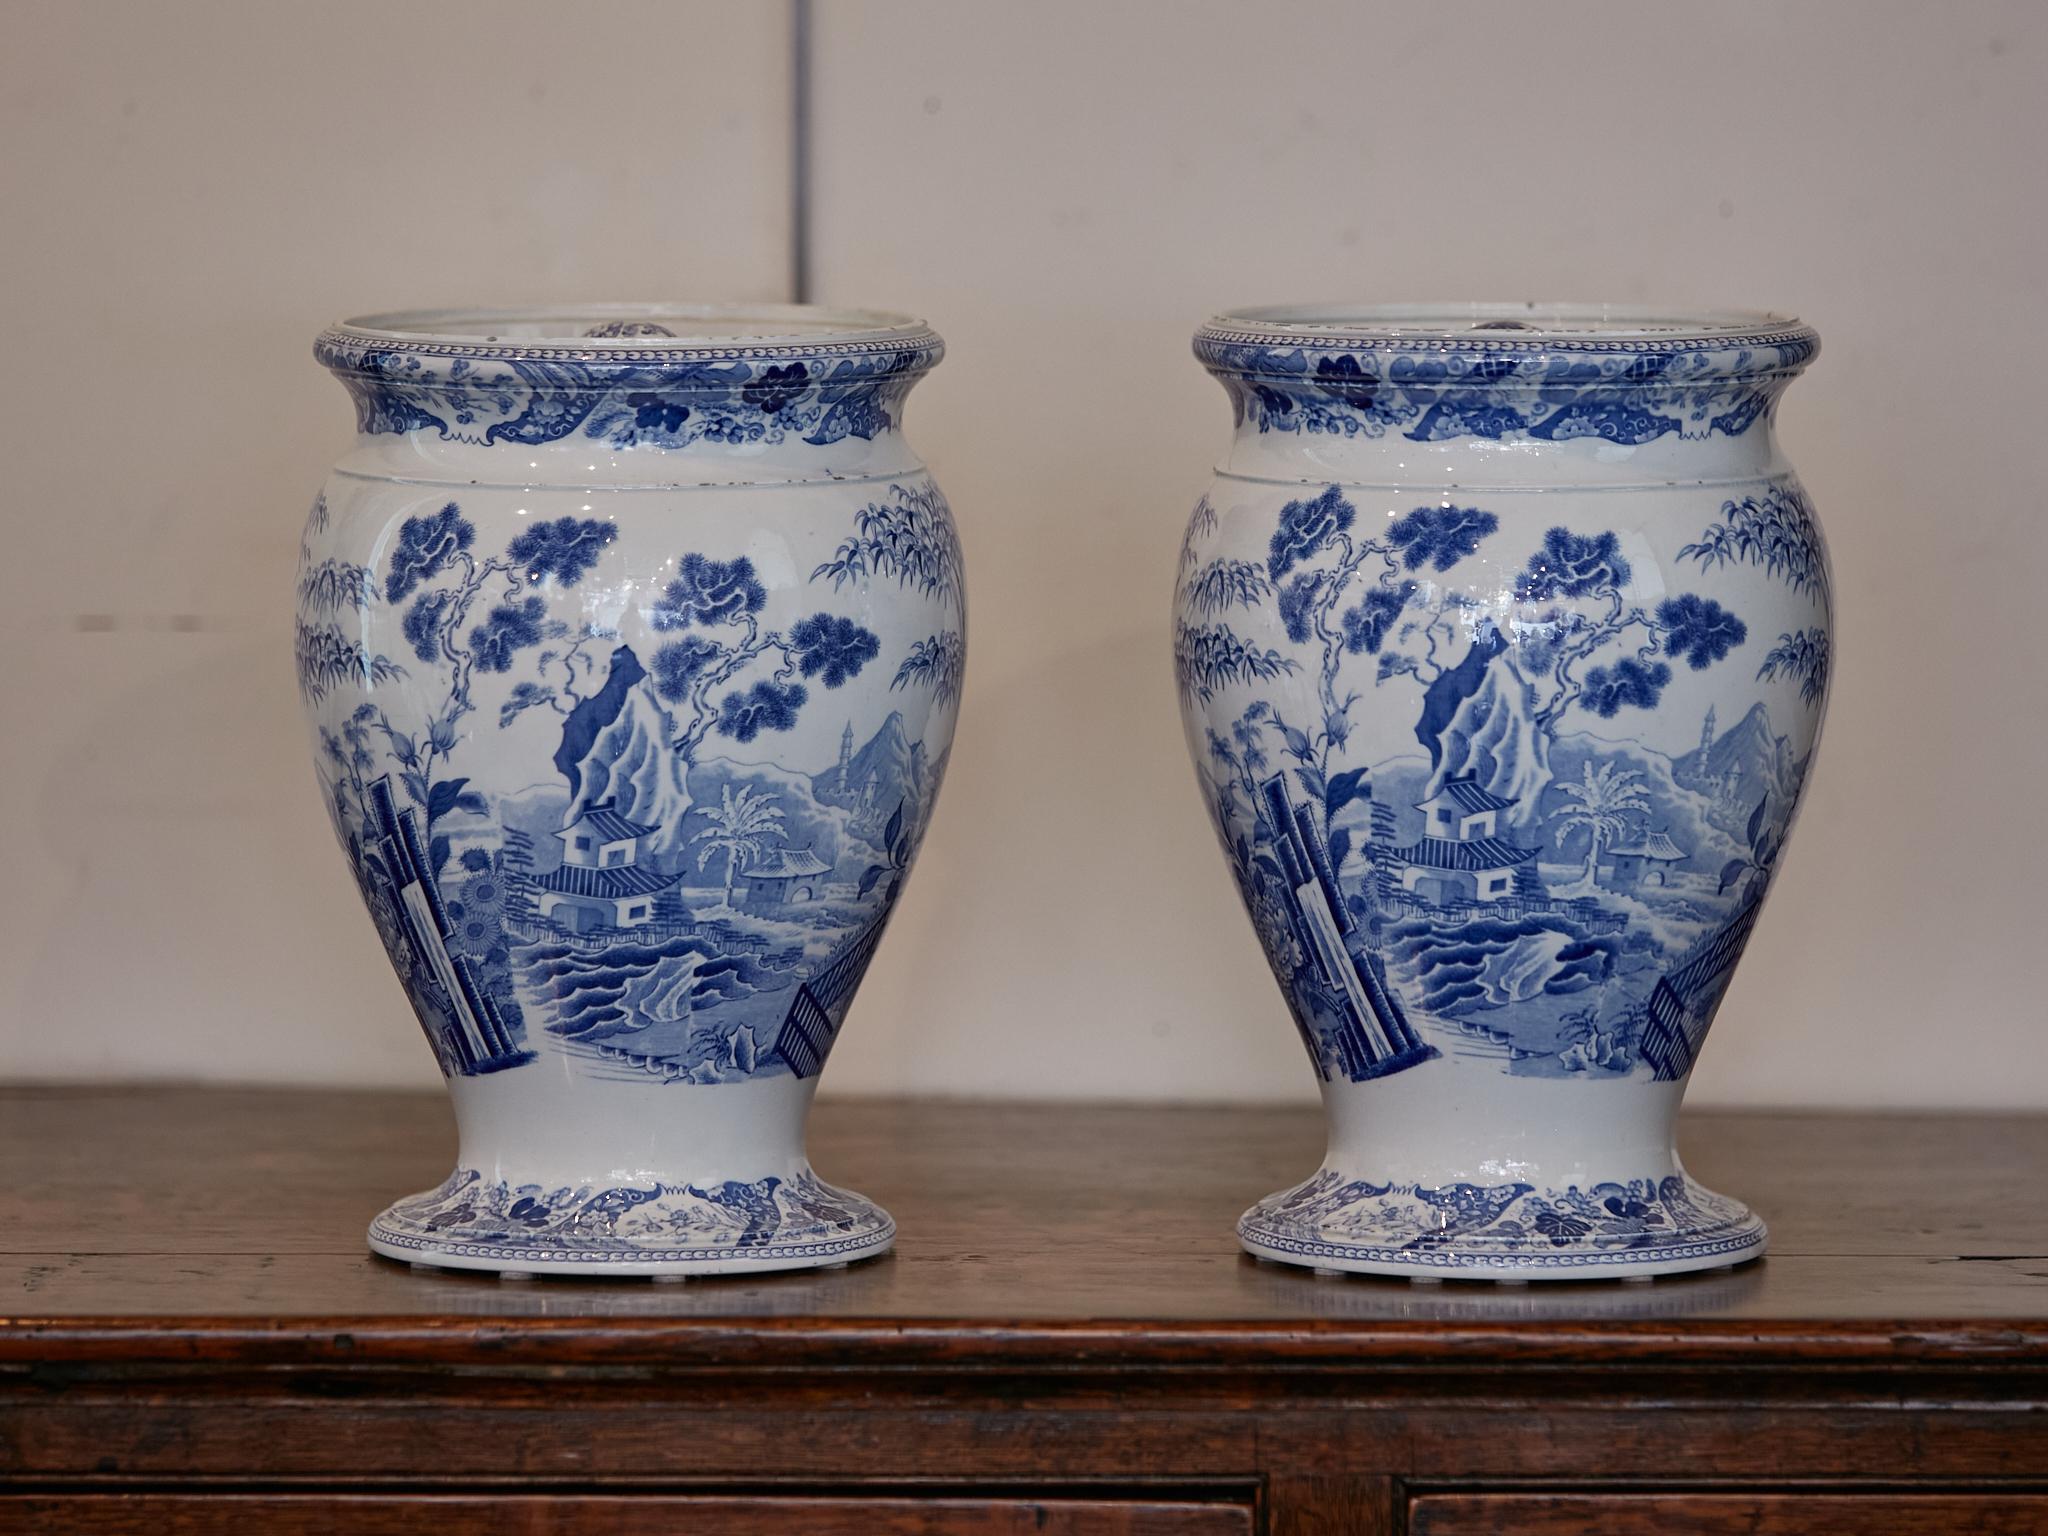 Porcelain English Wedgwood Blue Palissade Lidded Urns with Chinoiserie Gardens, a Pair